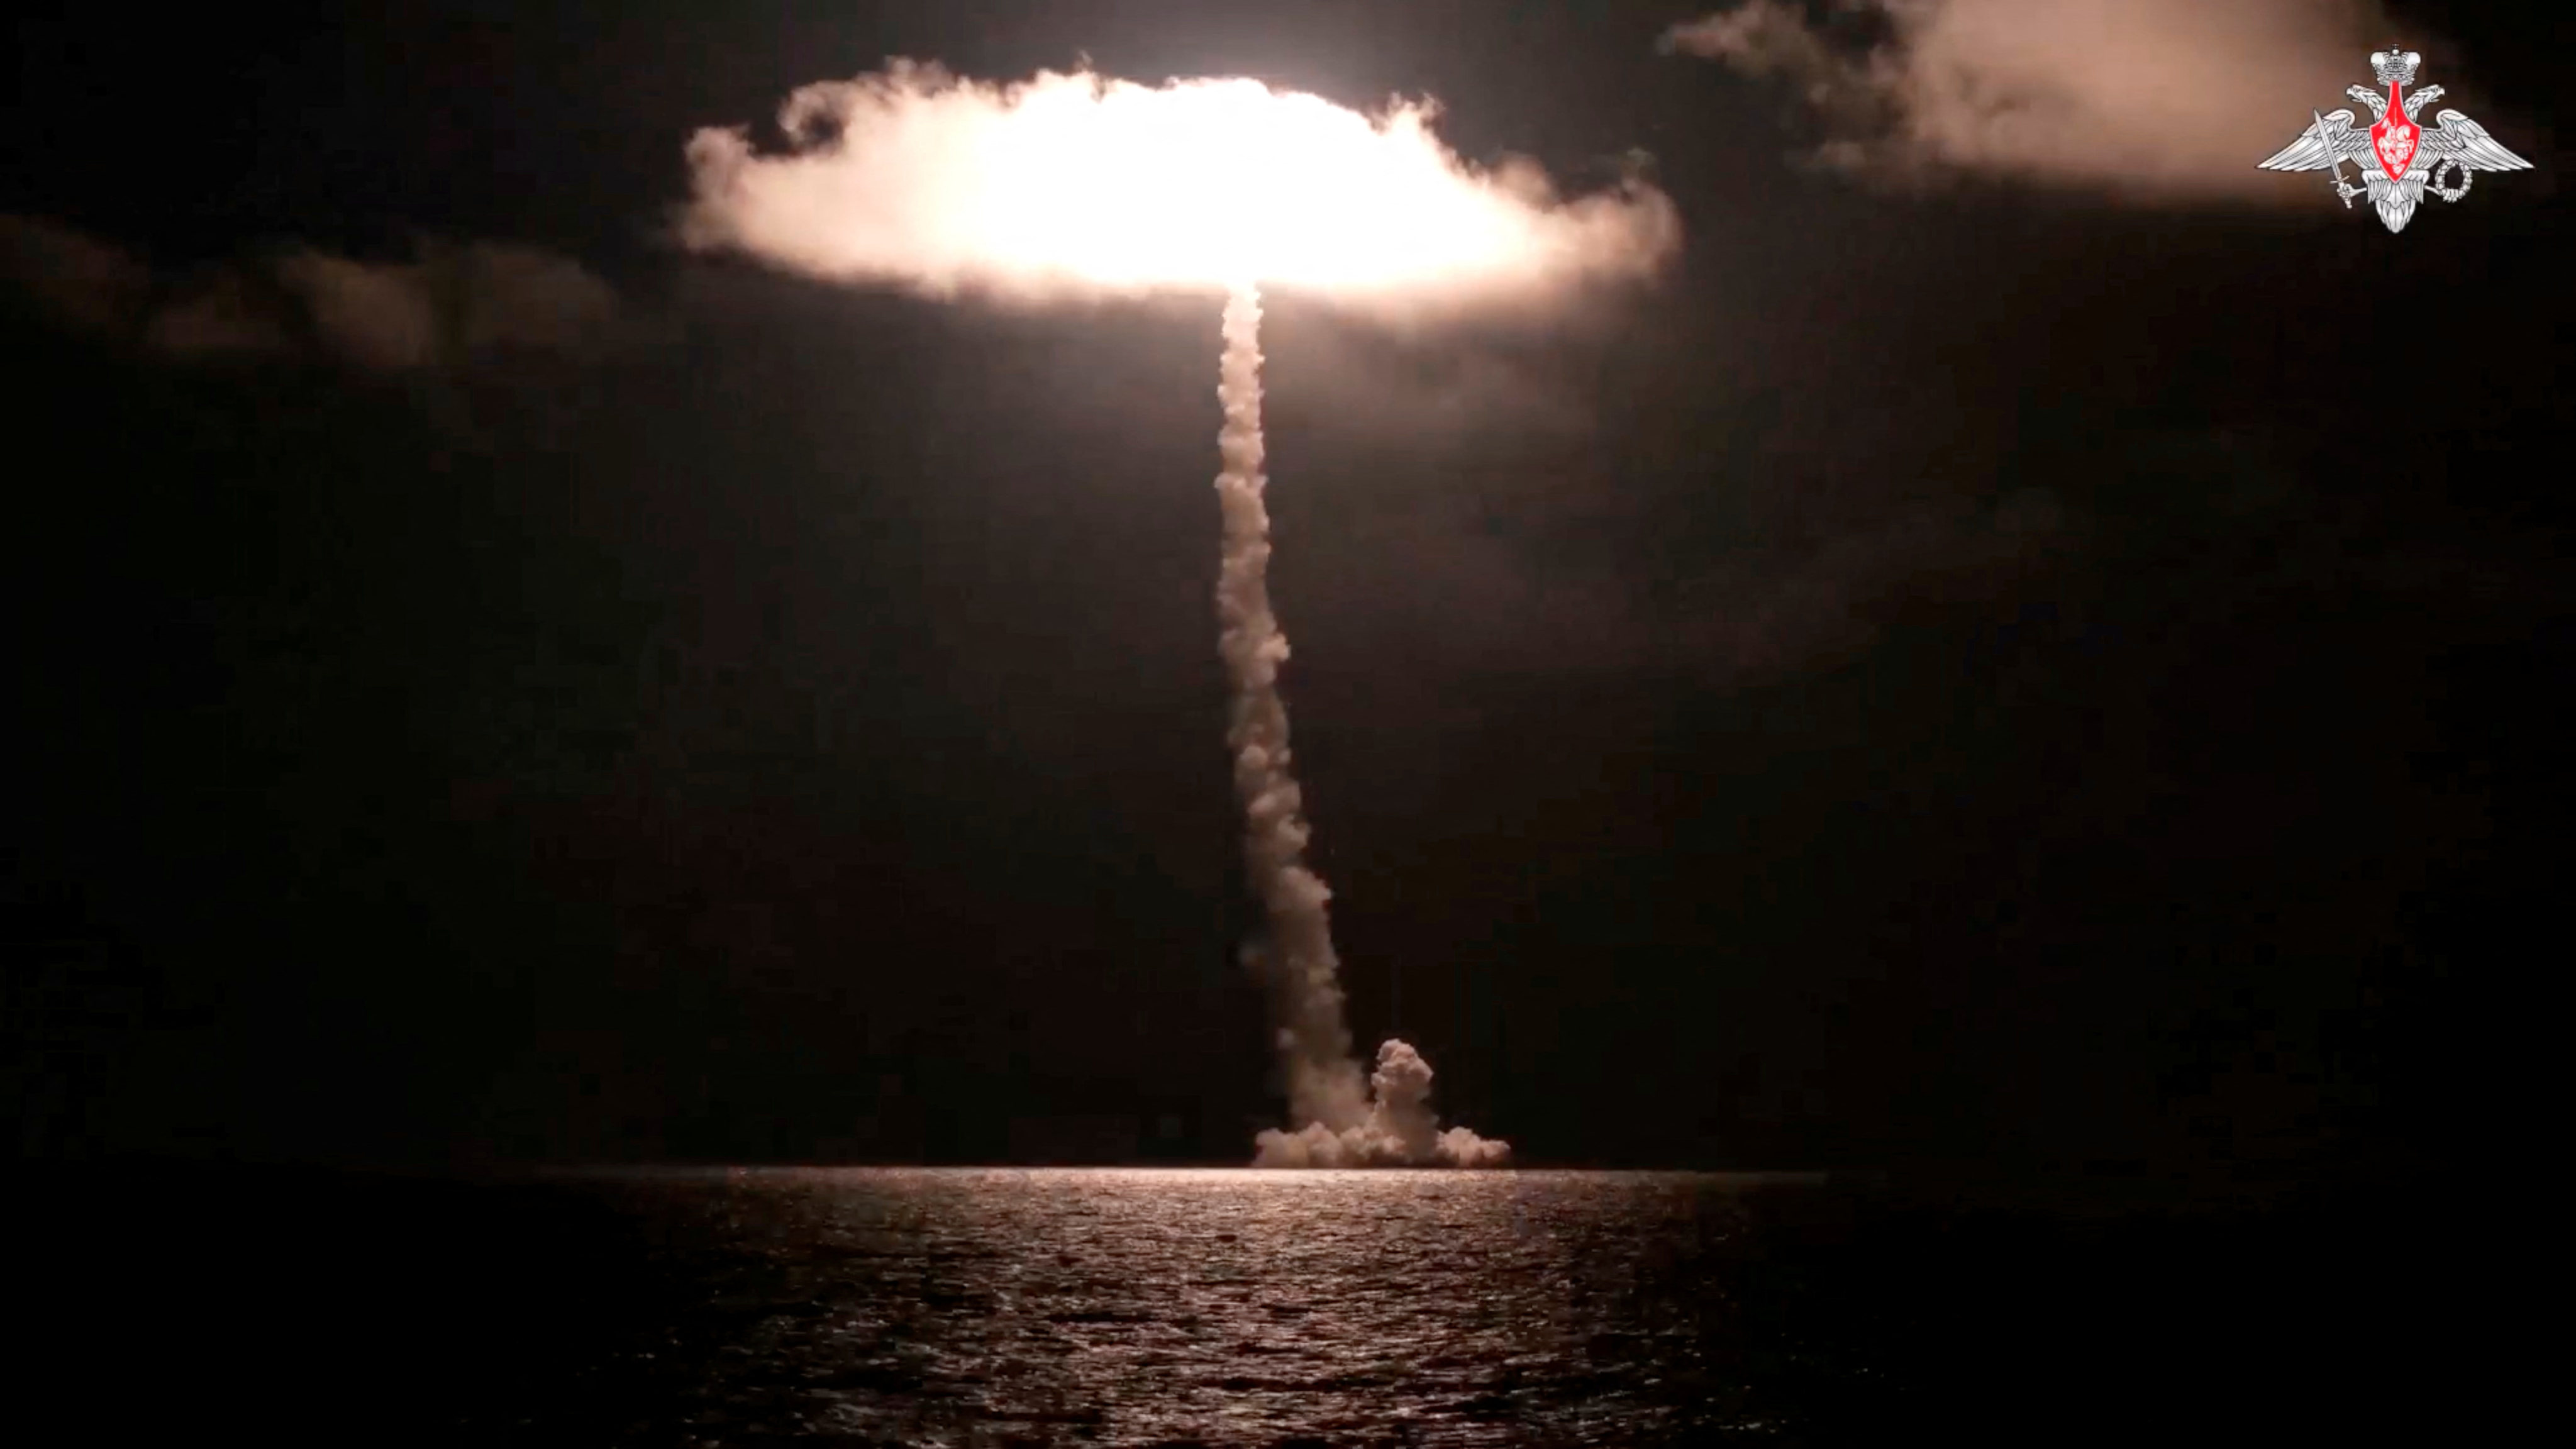 Russia’s new nuclear-powered submarine, Imperator Alexander III, test launches the Bulava ballistic missile, designed to carry nuclear warheads, from the White Sea, in this image taken from a video released on November 5 by the Russian Defence Ministry. Photo: Reuters